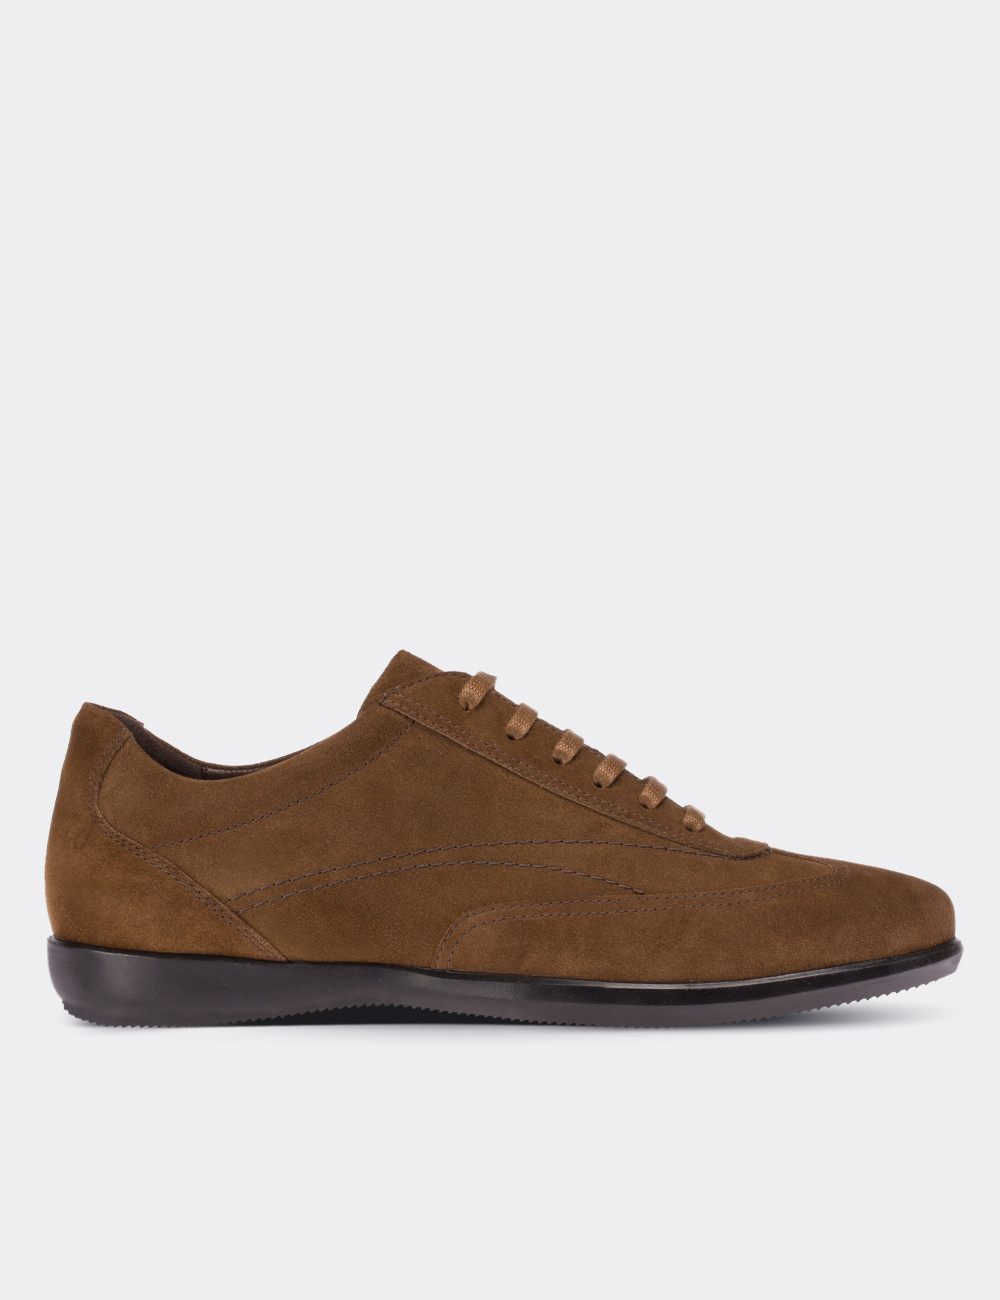 Tan Suede Leather Lace-up Shoes - 00321MTBAC02